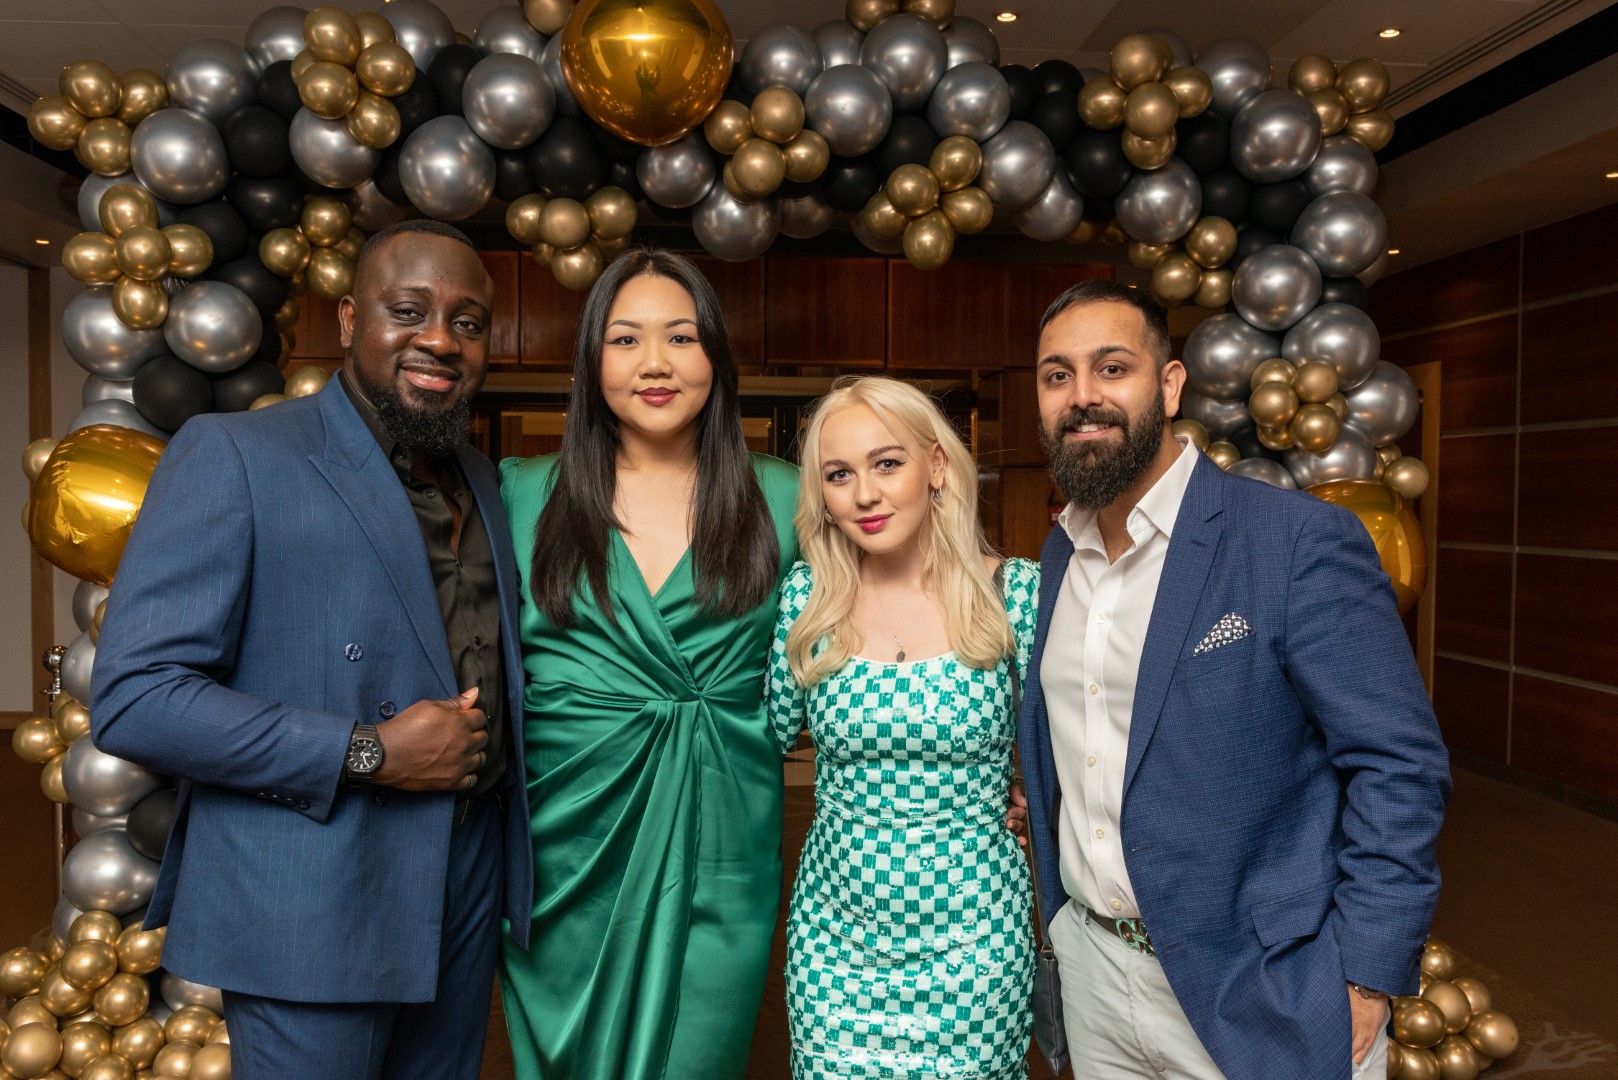 Attendees of the General Practice Awards 2023 wearing green and navy evening wear, surrounded by a gold and silver balloon arch